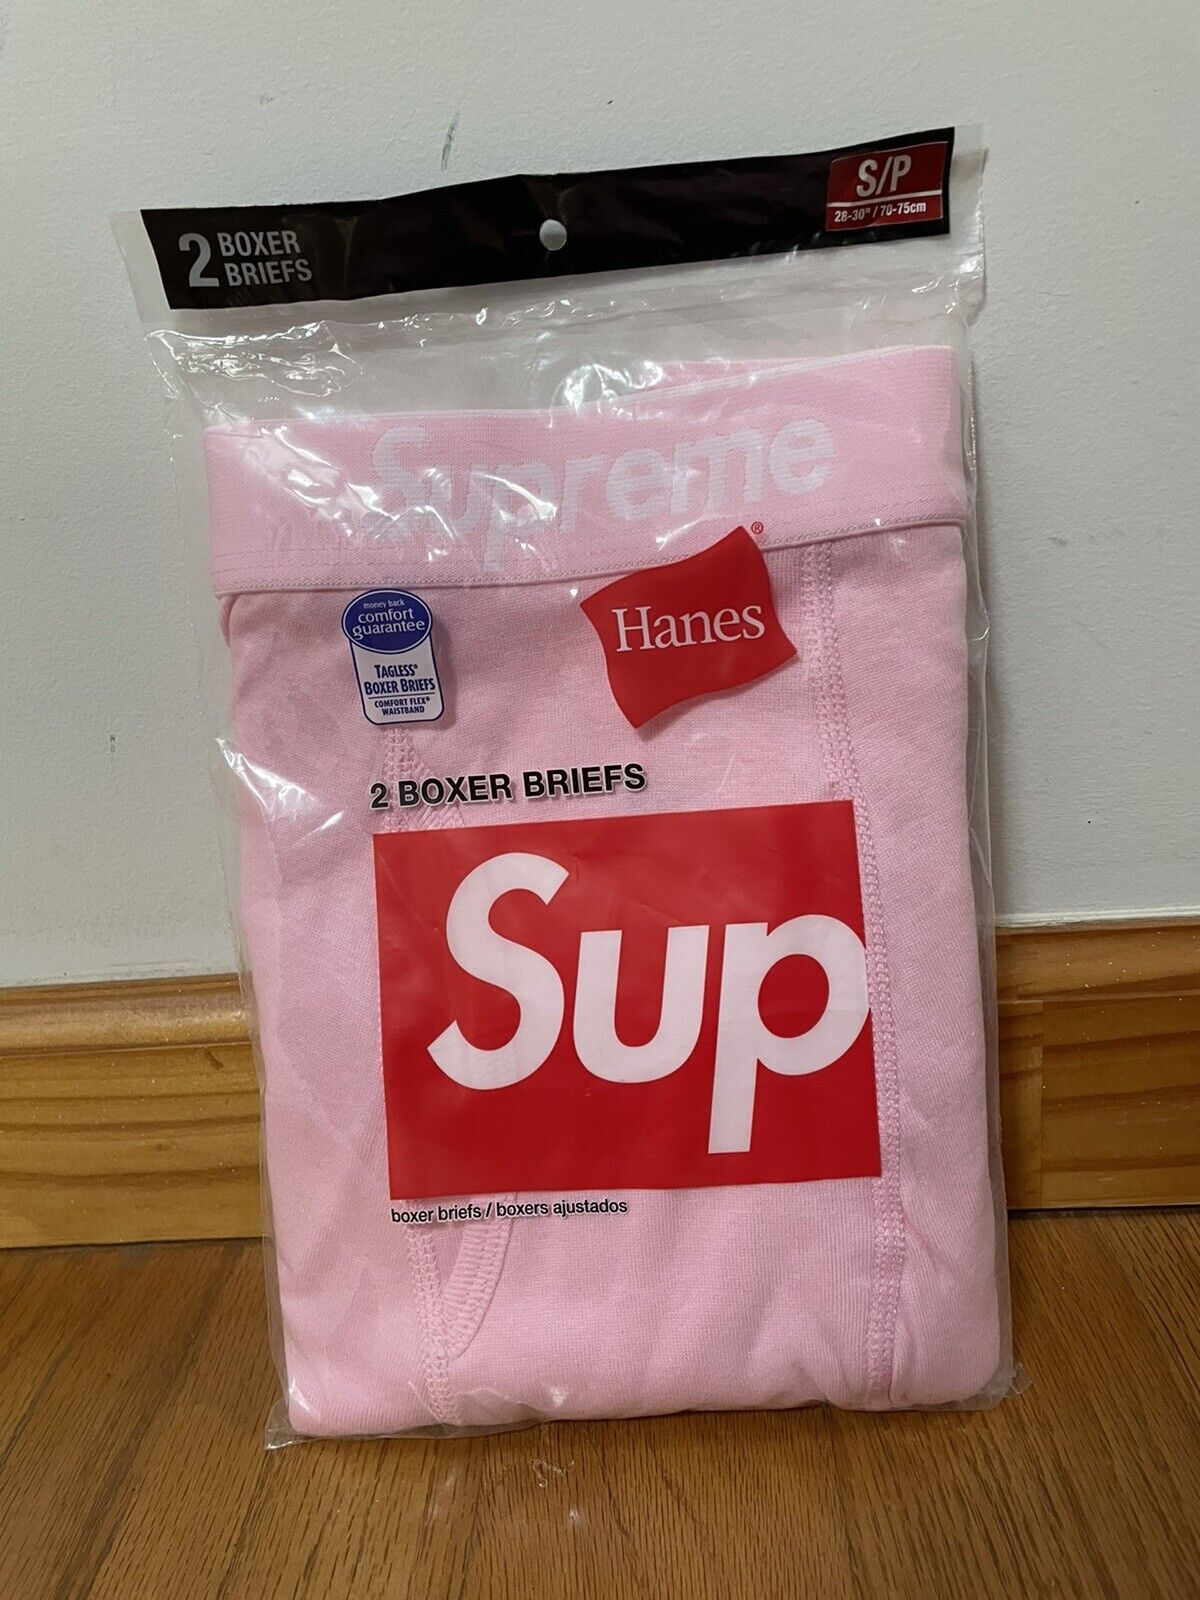 Supreme Hanes Boxer Briefs (2 Pack) - Size S-XL in Pink - New FW21